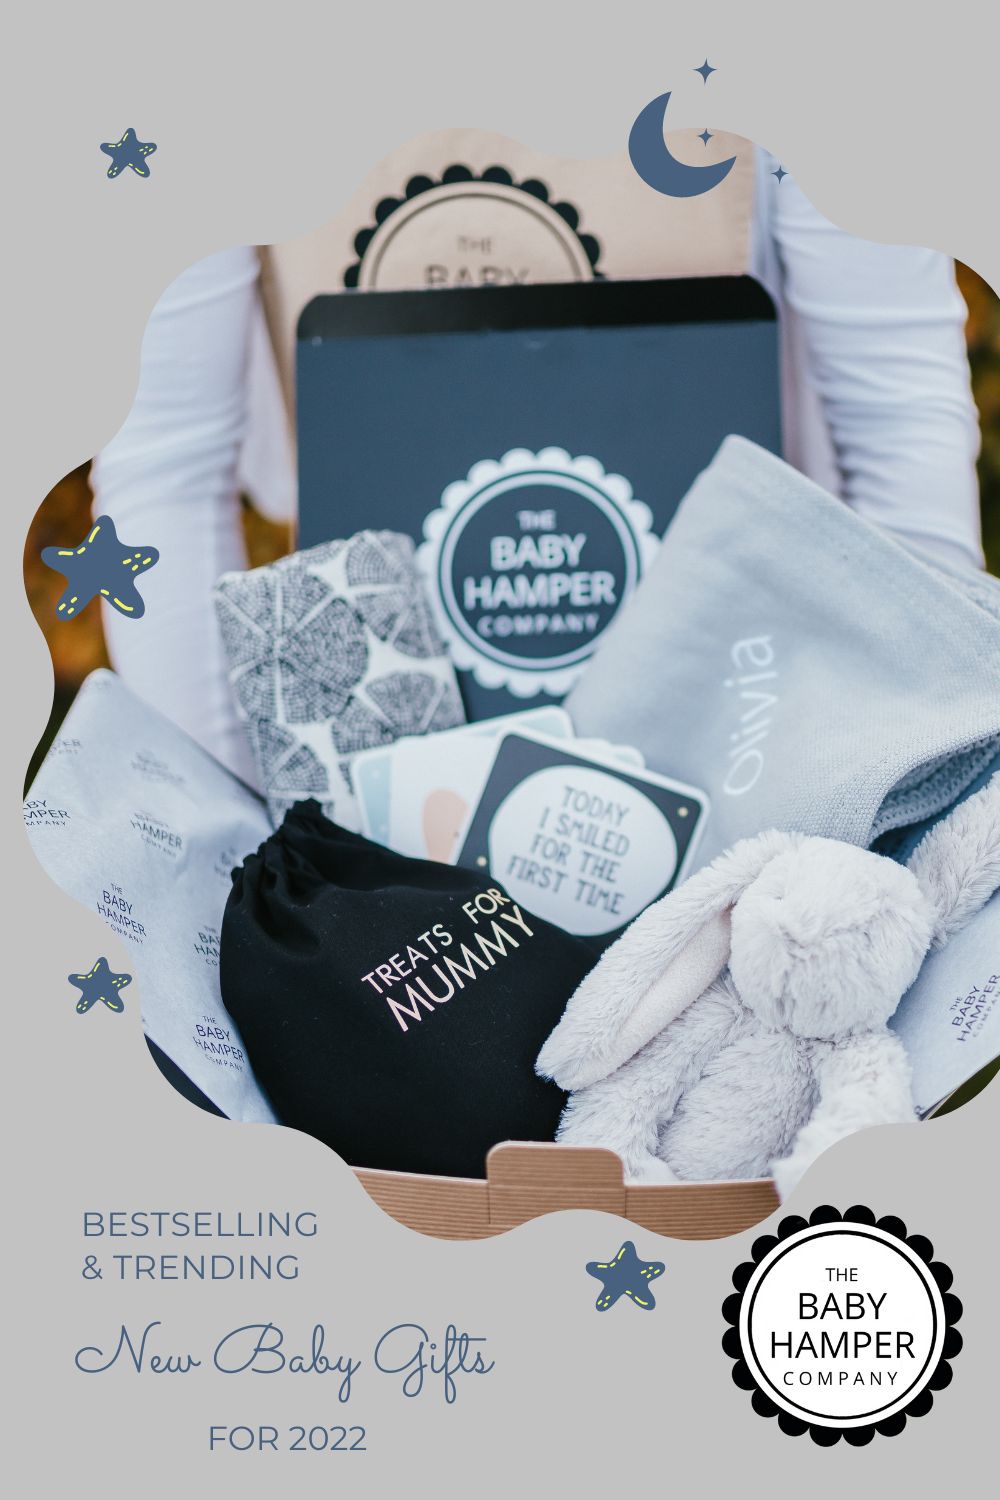 Bestselling Trending New Baby Gifts in the UK for 2022